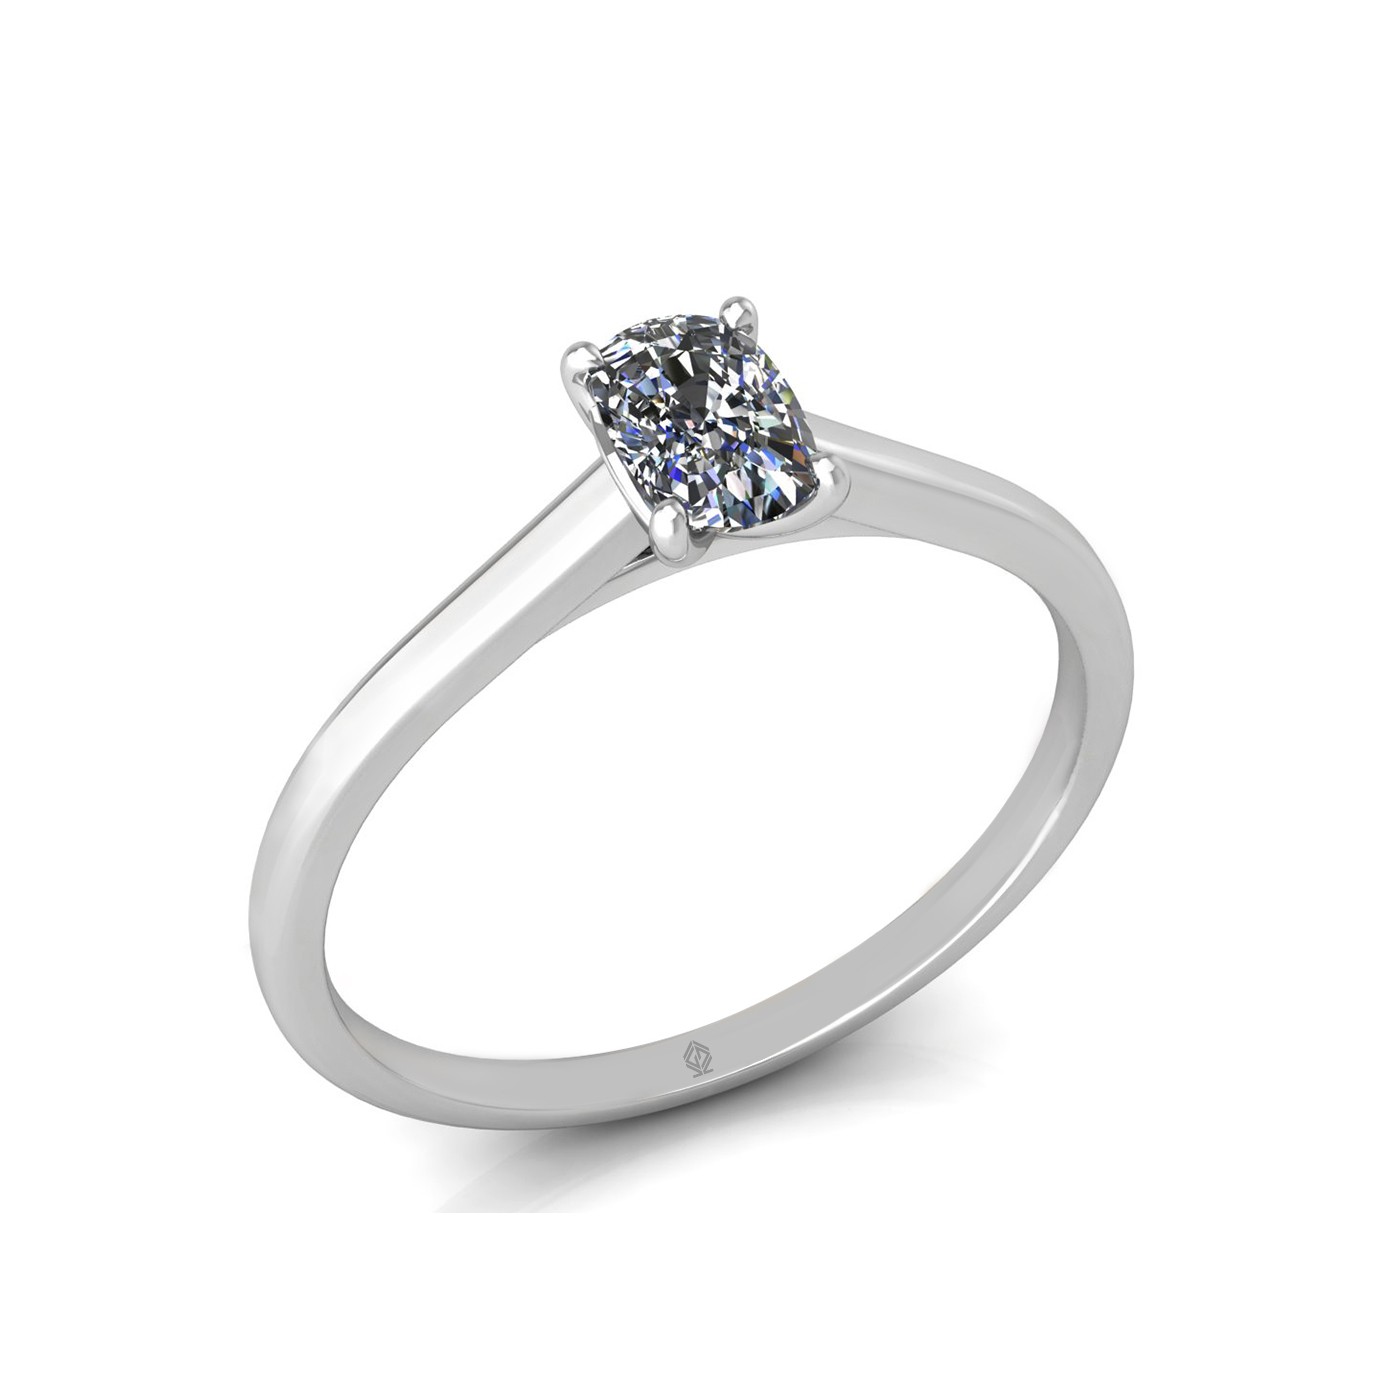 18k white gold  0,50 ct 4 prongs solitaire elongated cushion cut diamond engagement ring with whisper thin band